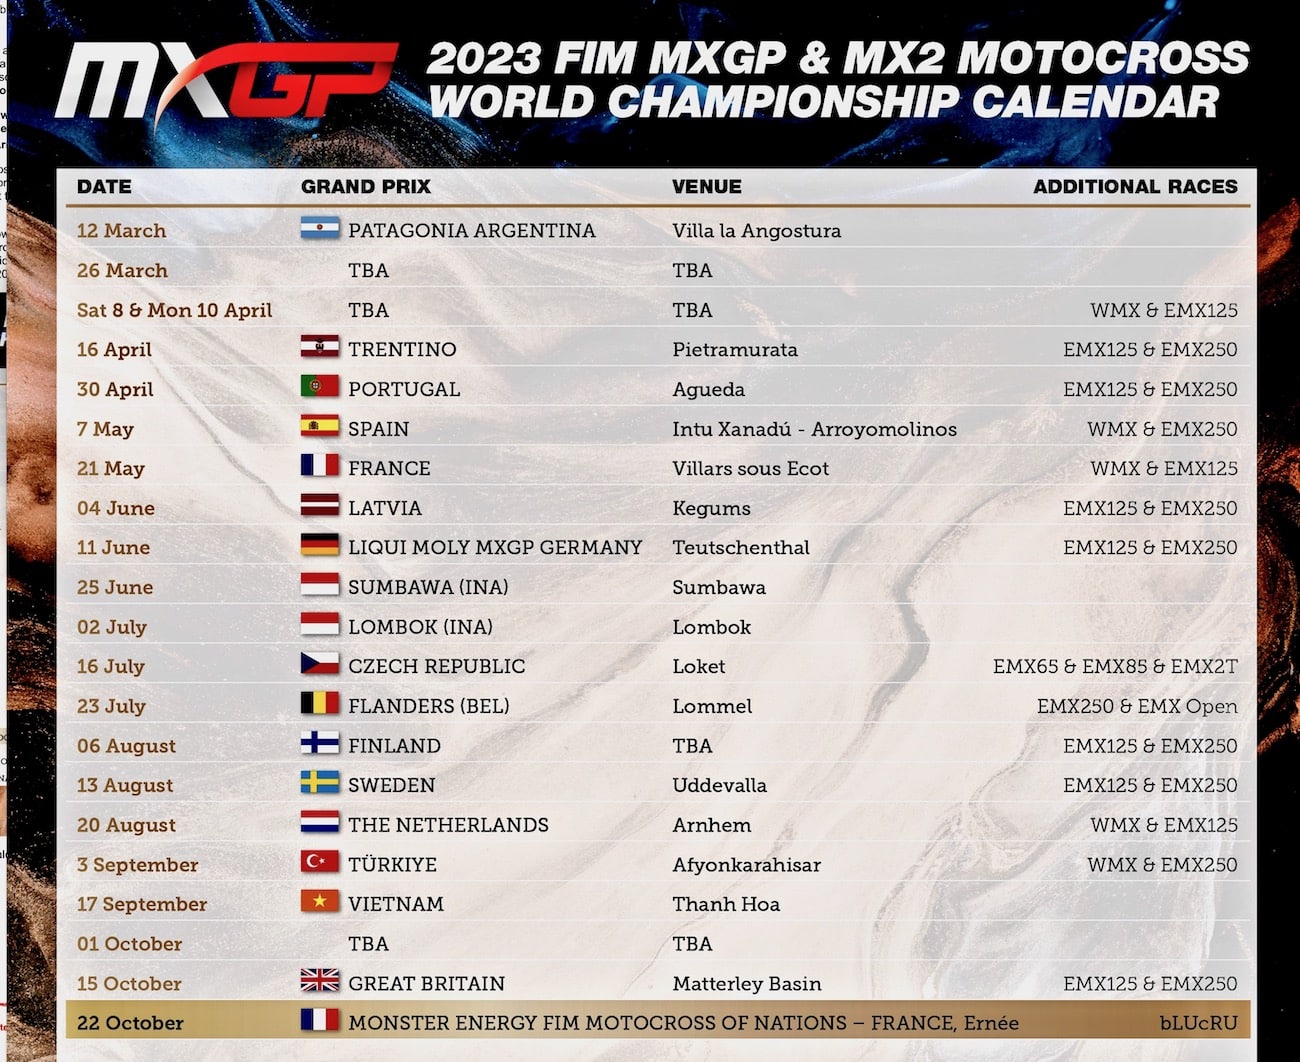 FIRST LOOK! 2023 FIM WORLD MOTOCROSS SCHEDULE STARTS IN MARCH & ENDS